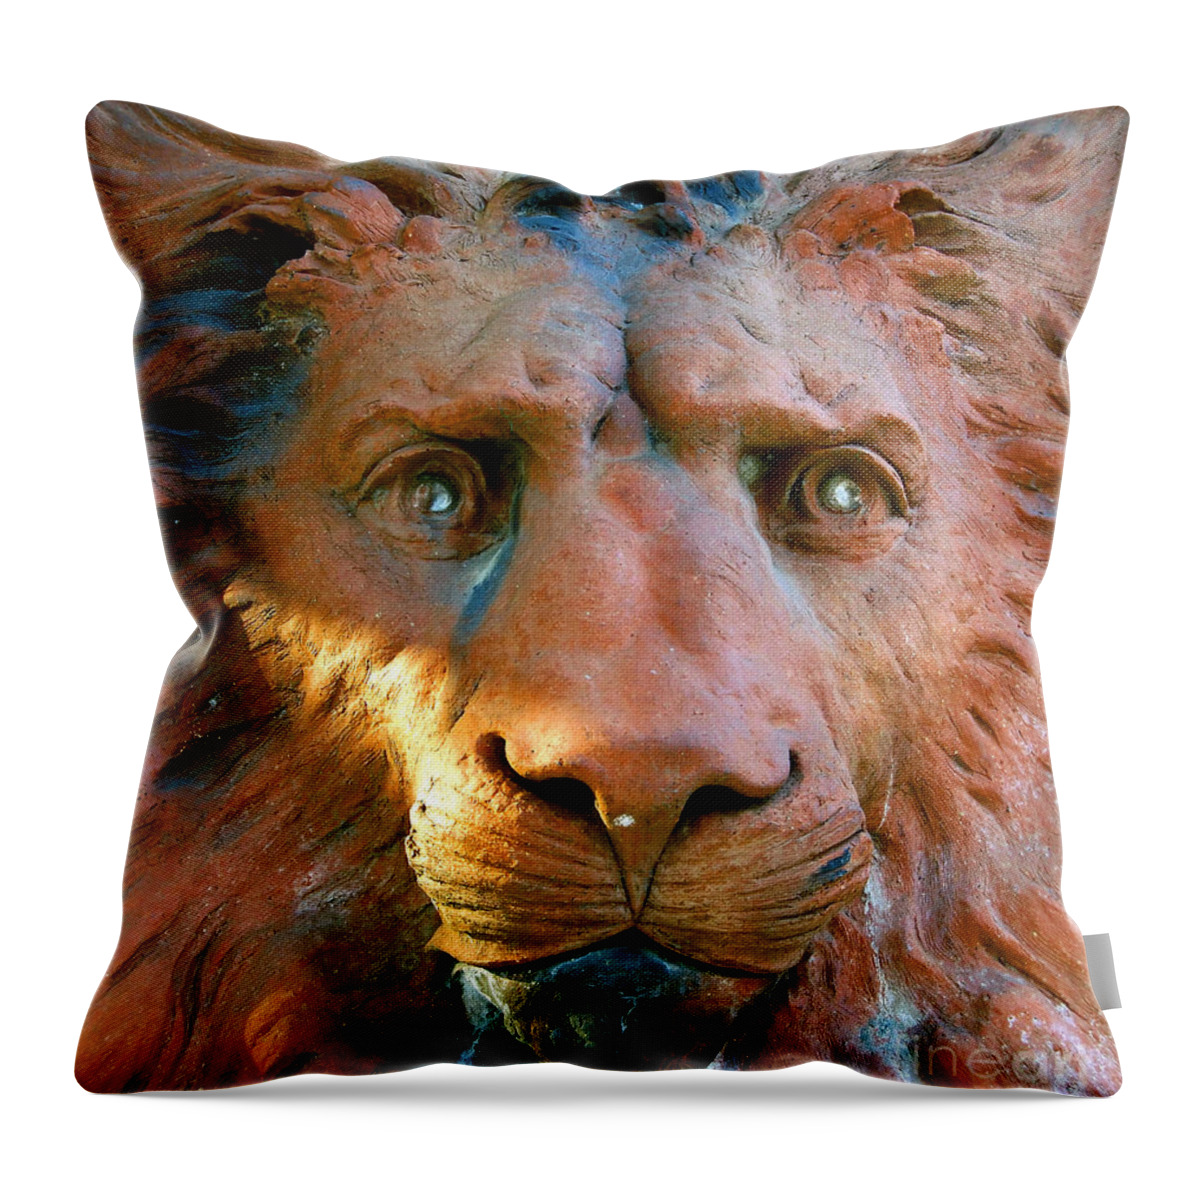 Saint Augustine Florida Throw Pillow featuring the photograph Lion of Saint Augustine by David Lee Thompson